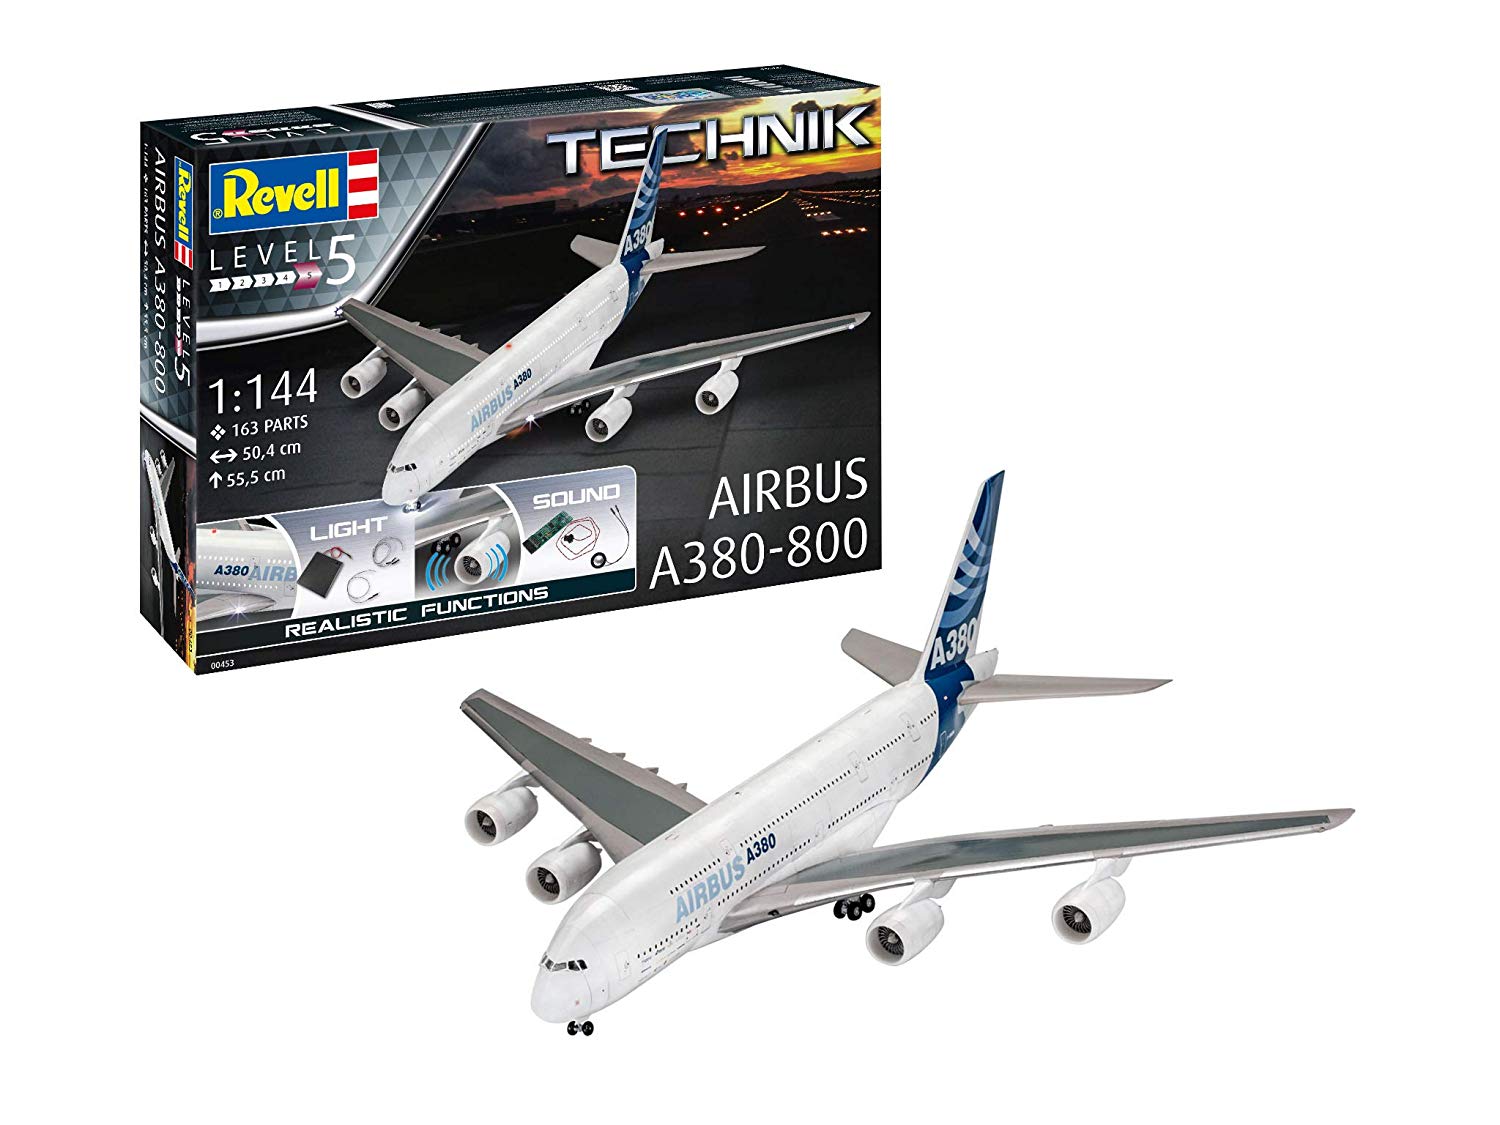 Revell Gmbh 00453 Airbus A380-800 Technik Plastic Model Kit With Electronic